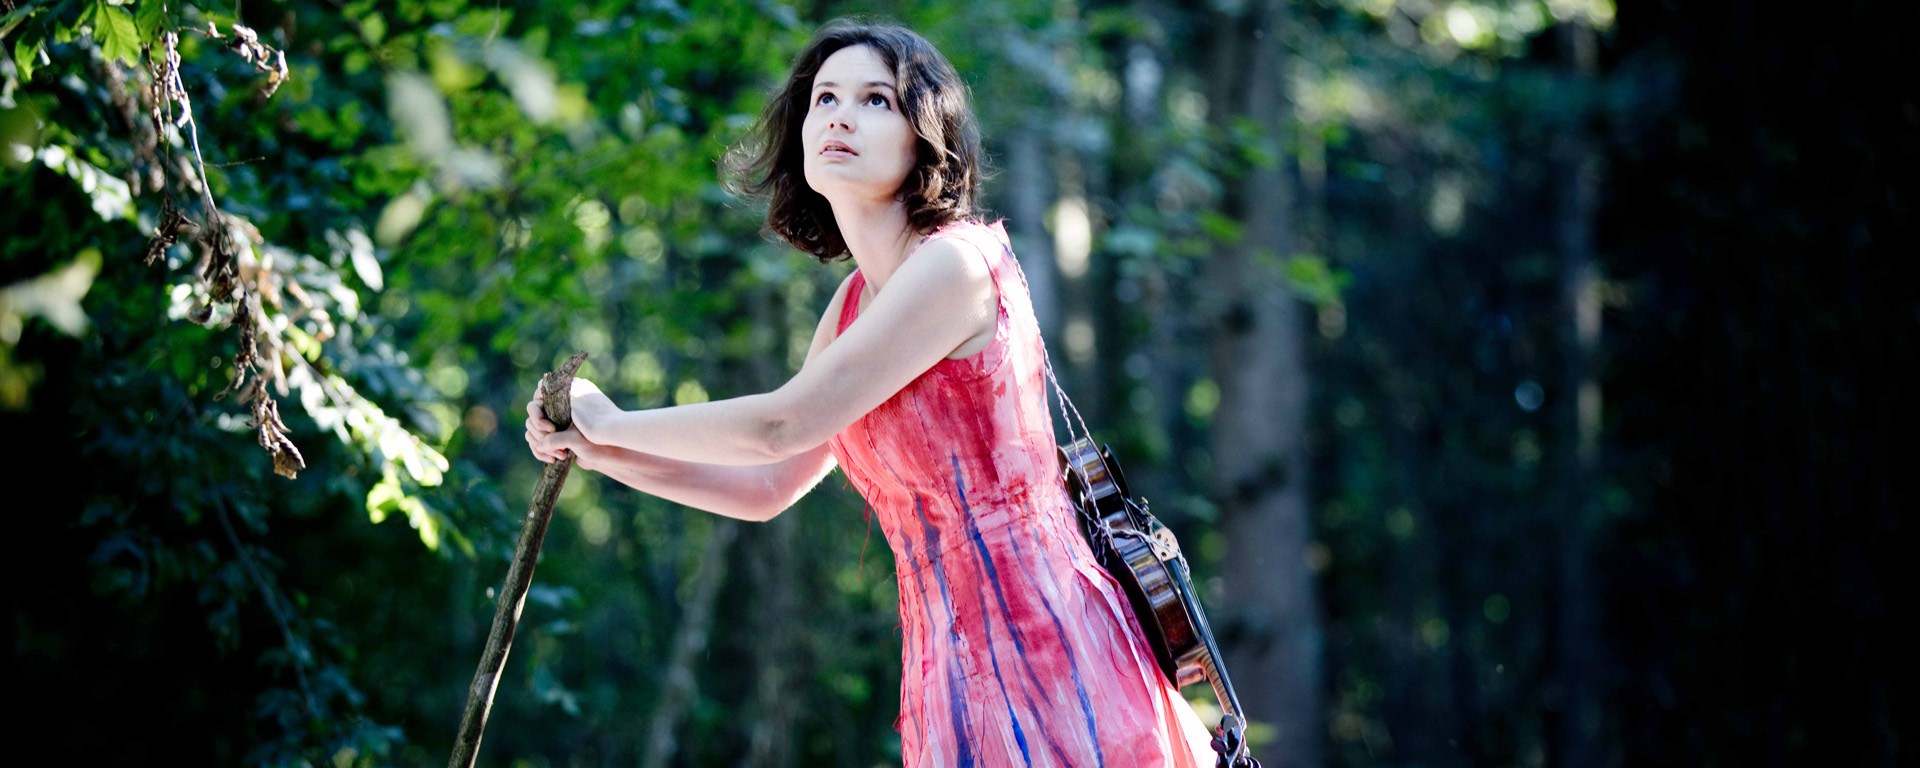 Patricia Kopatchinskaja in the forest. She carries the violin fastened with a cord on her back.